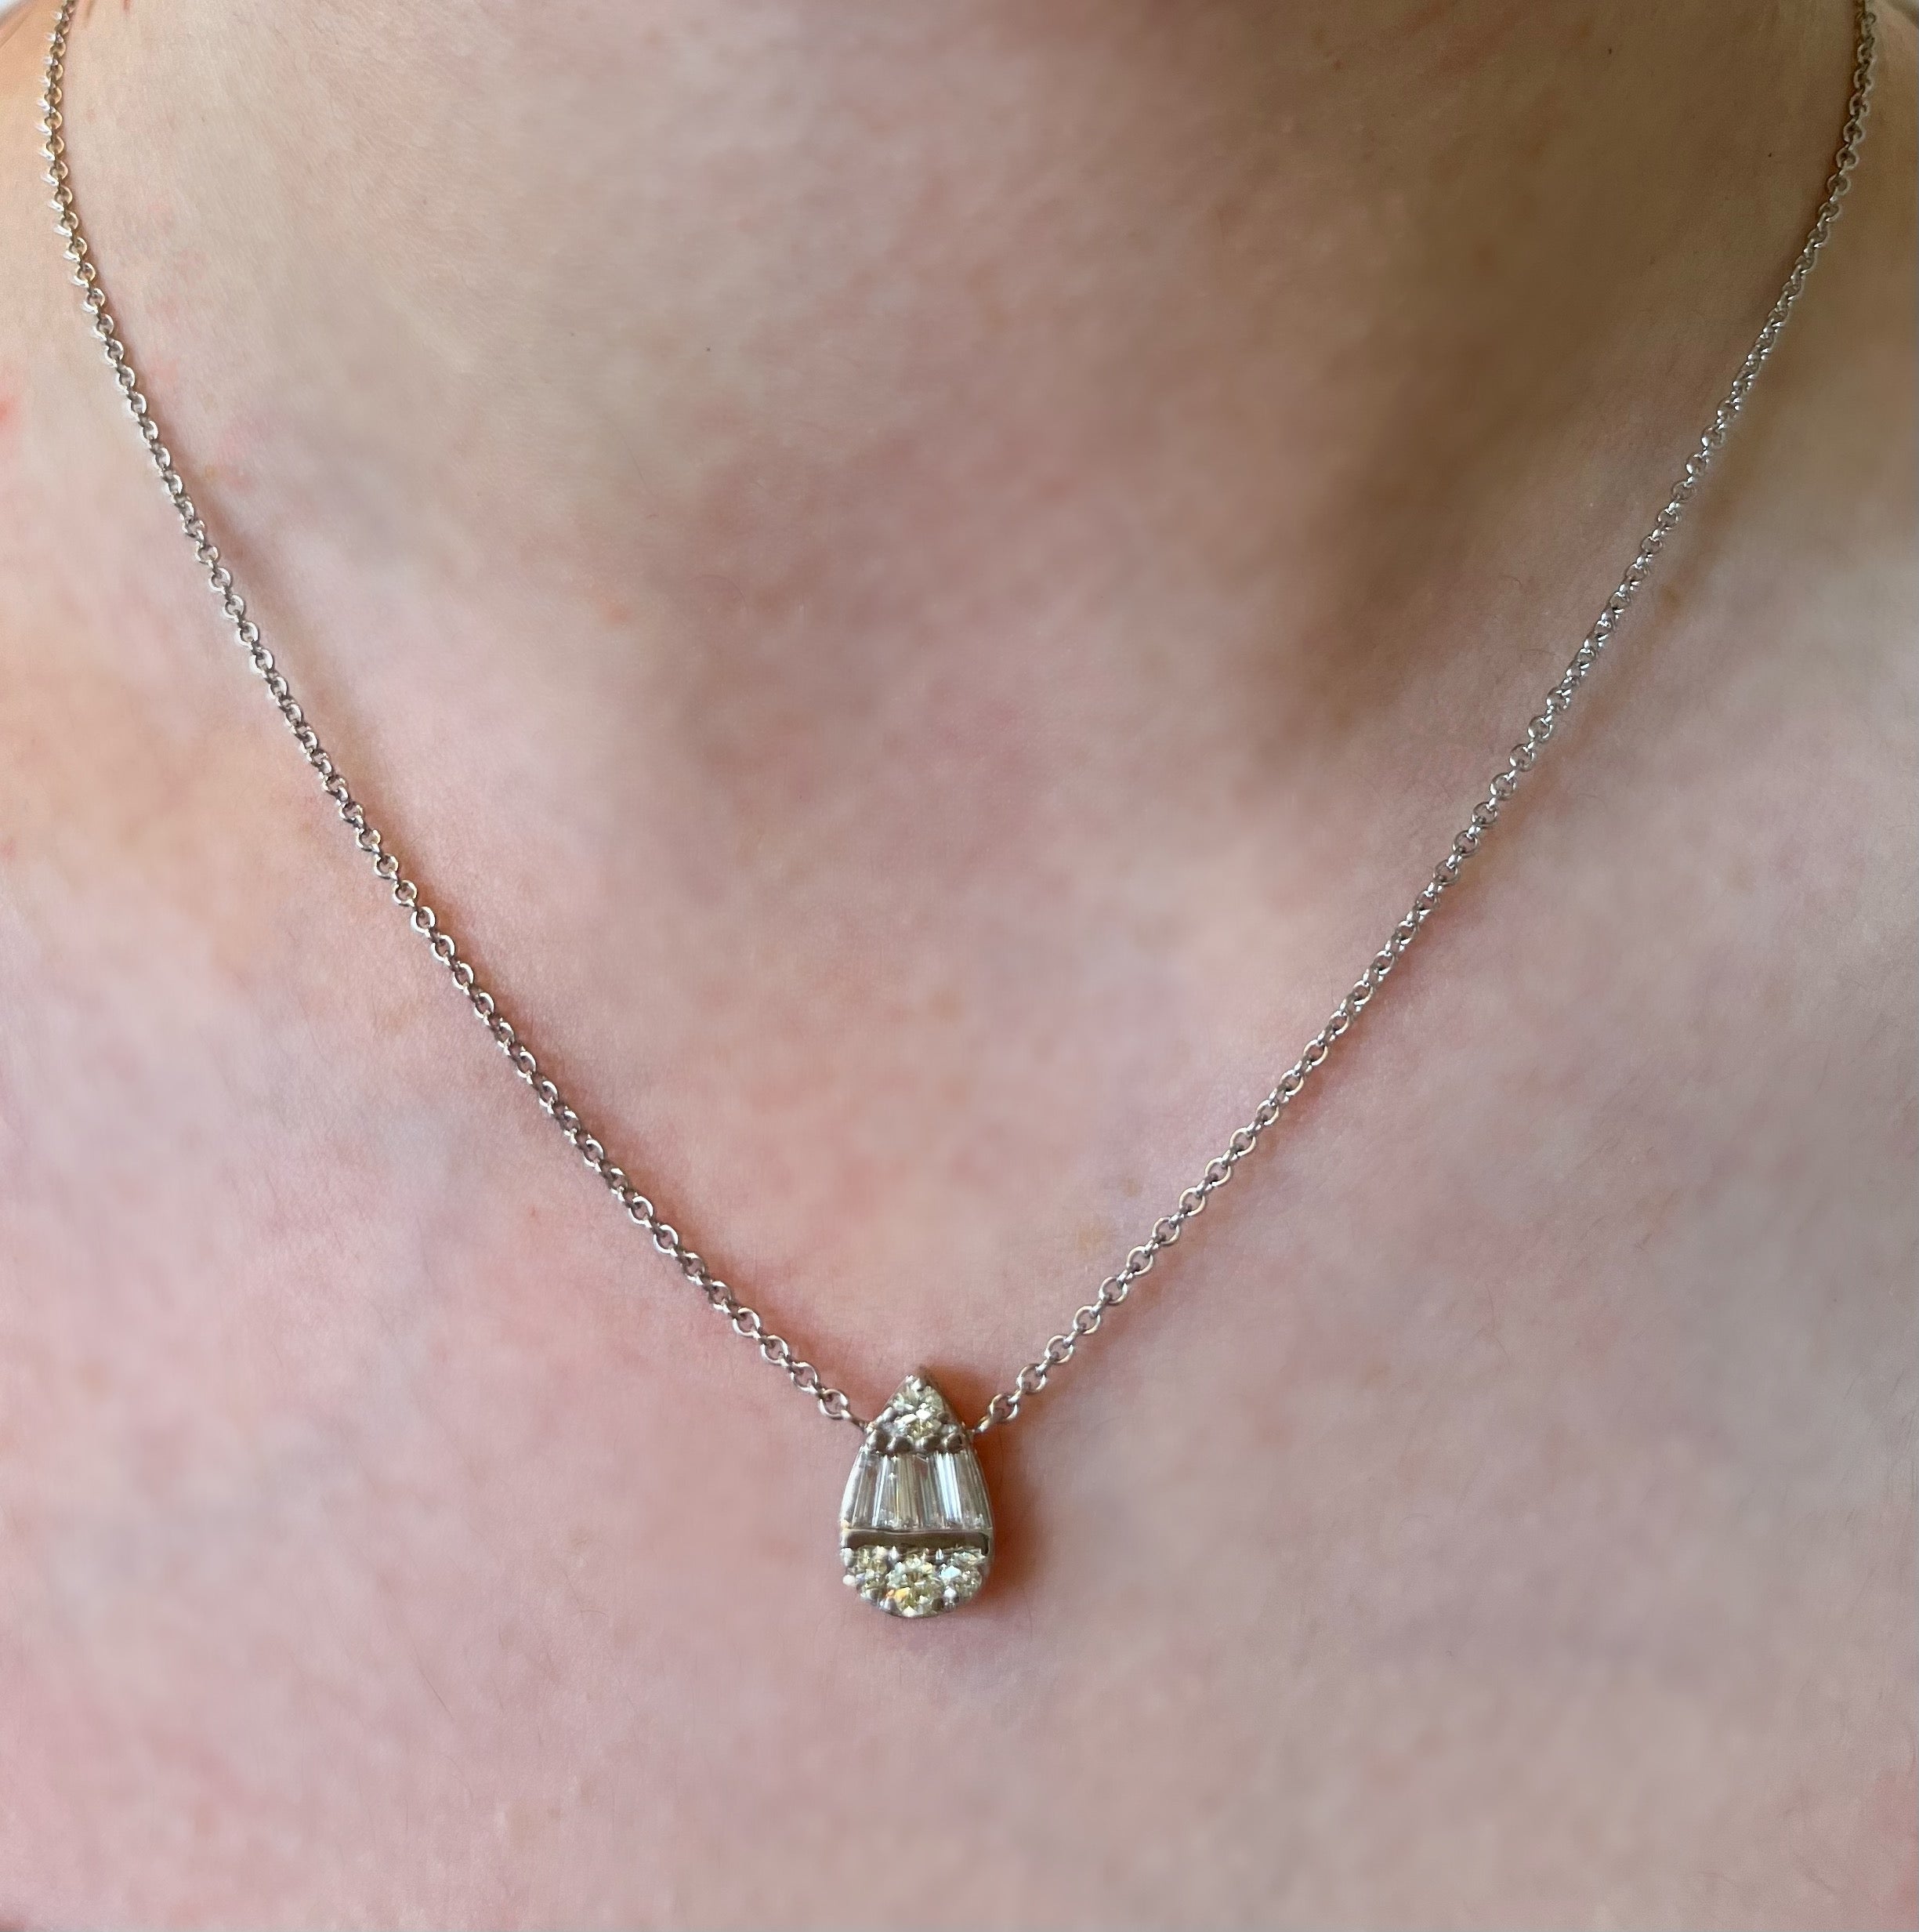 The Royal Pear Necklace